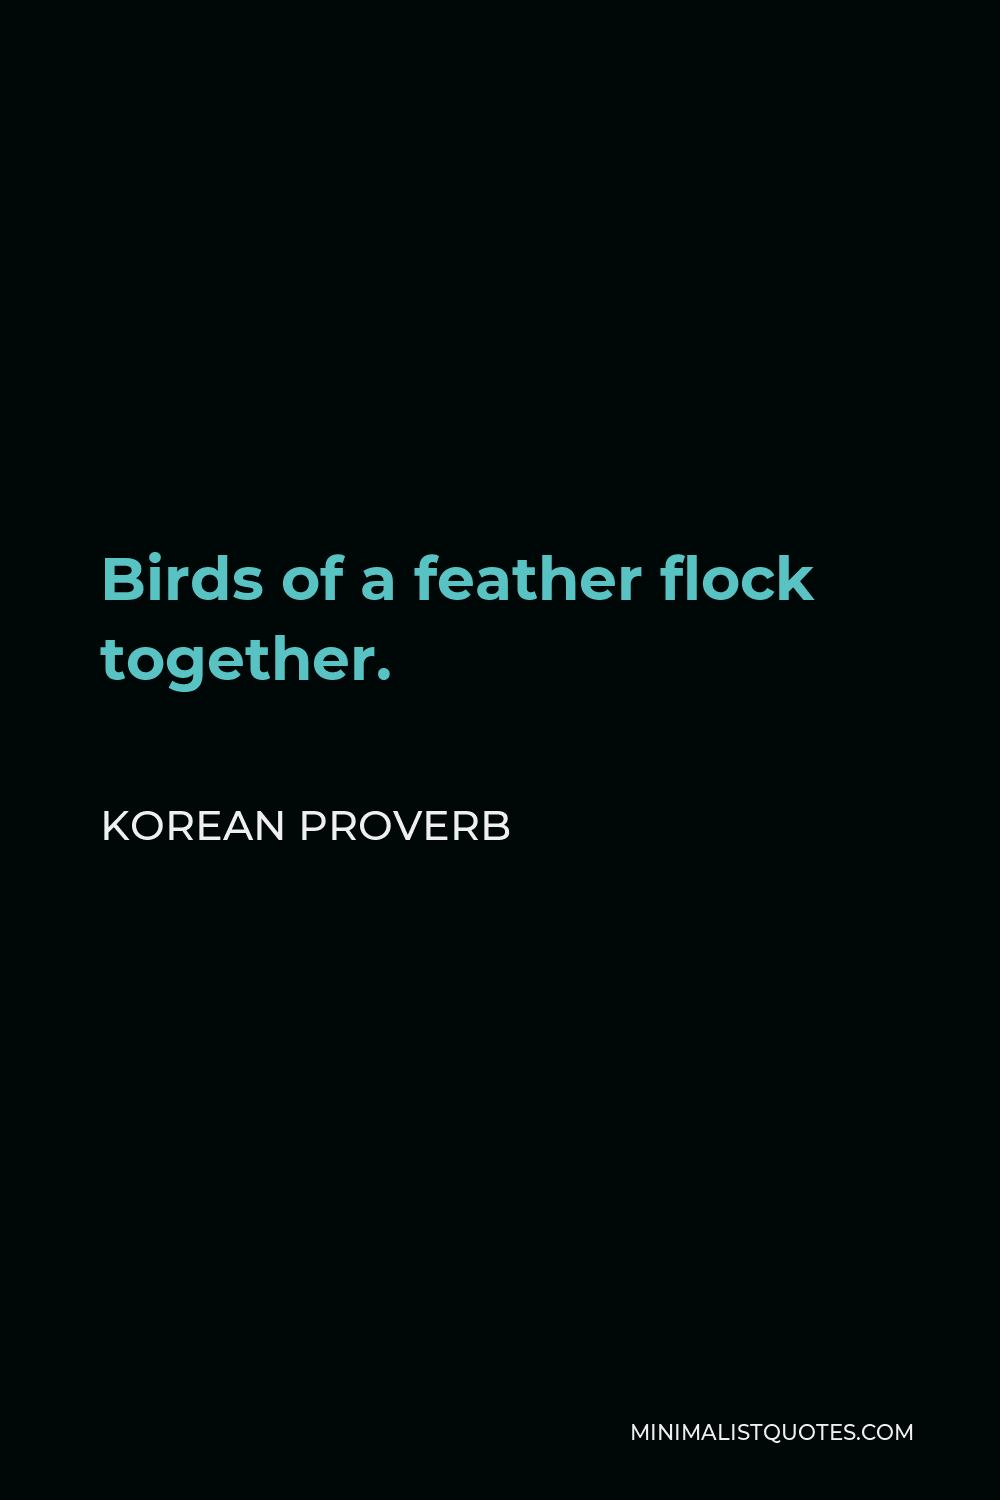 Korean Proverb Quote - Birds of a feather flock together.